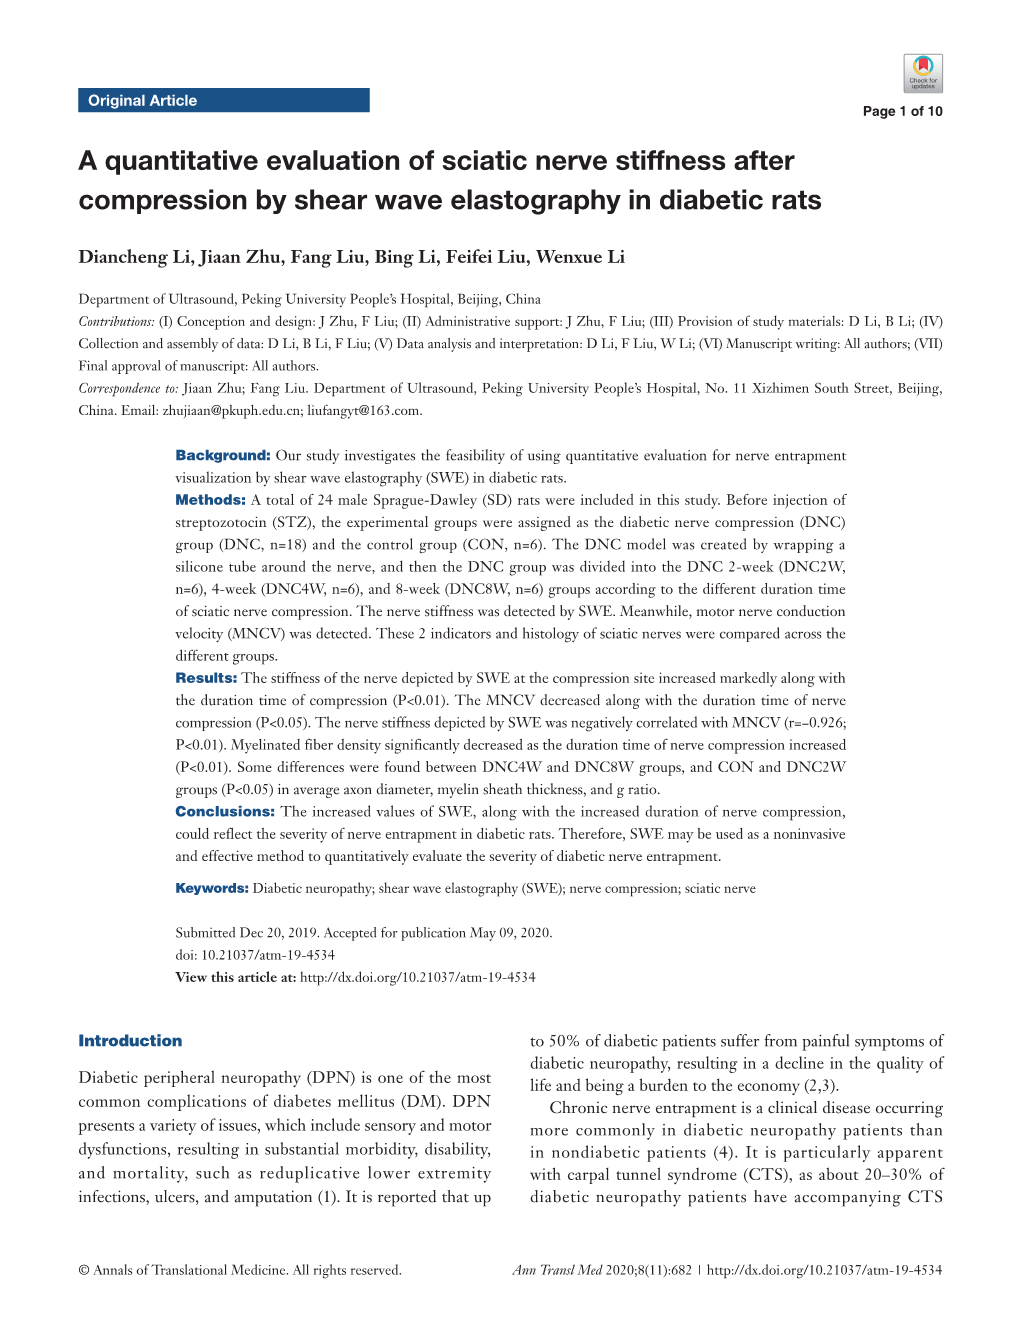 A Quantitative Evaluation of Sciatic Nerve Stiffness After Compression by Shear Wave Elastography in Diabetic Rats